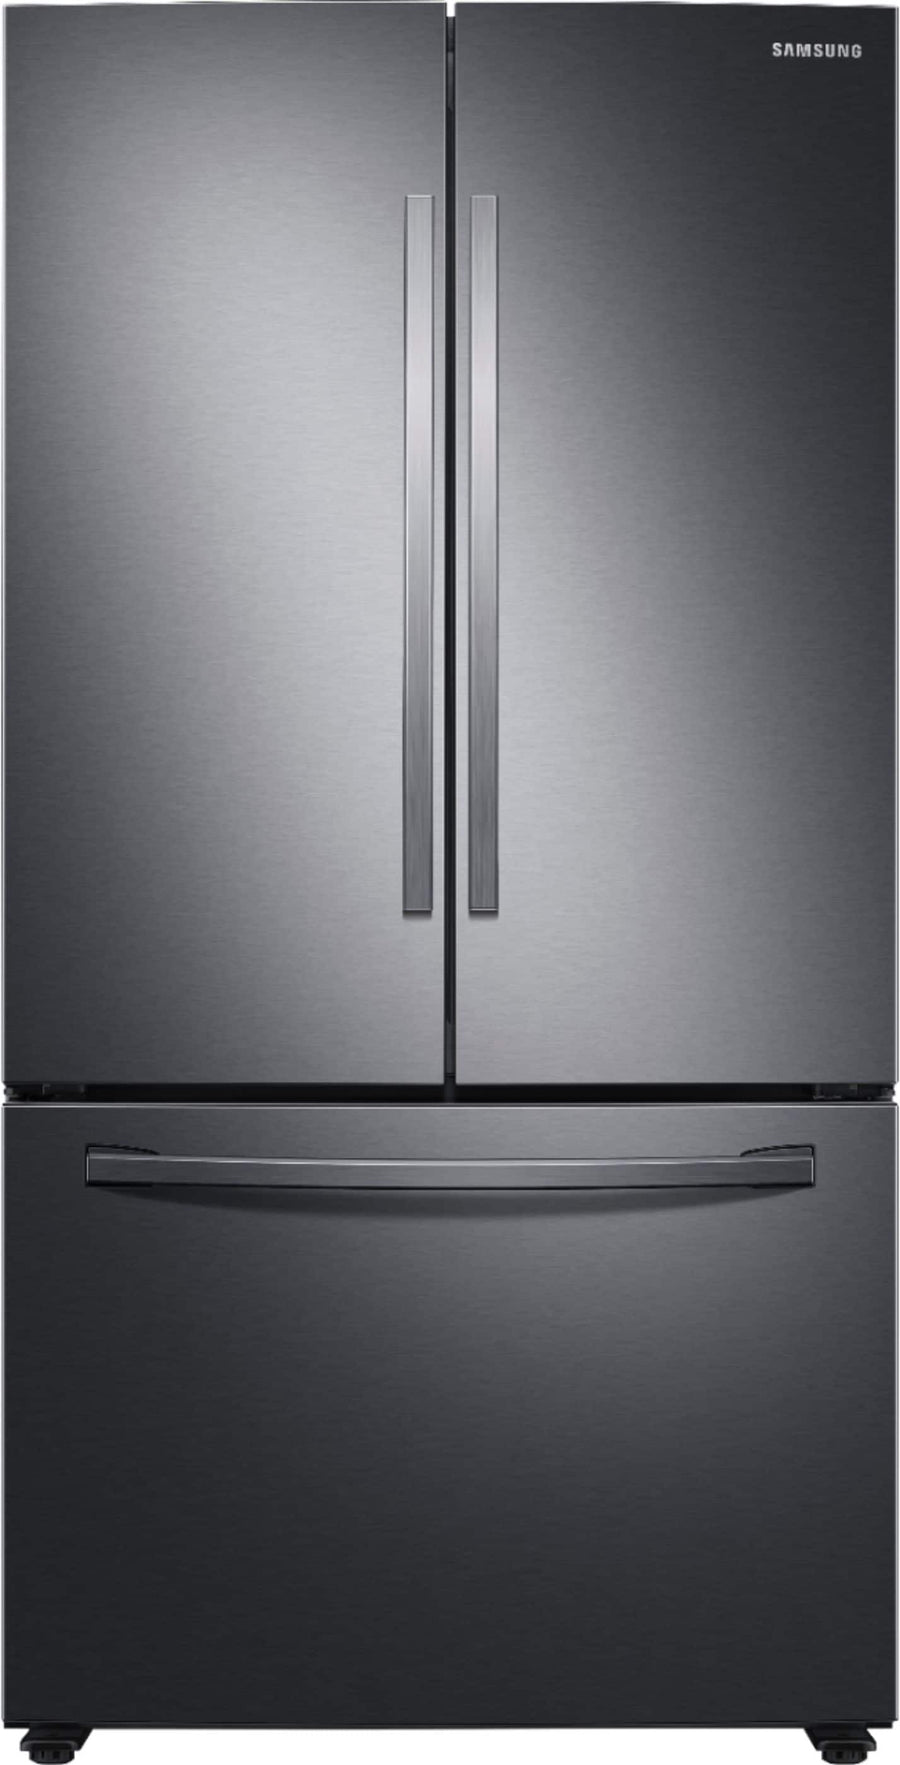 Samsung - 28 cu. ft. Large Capacity 3-Door French Door Refrigerator with AutoFill Water Pitcher - Black stainless steel_0